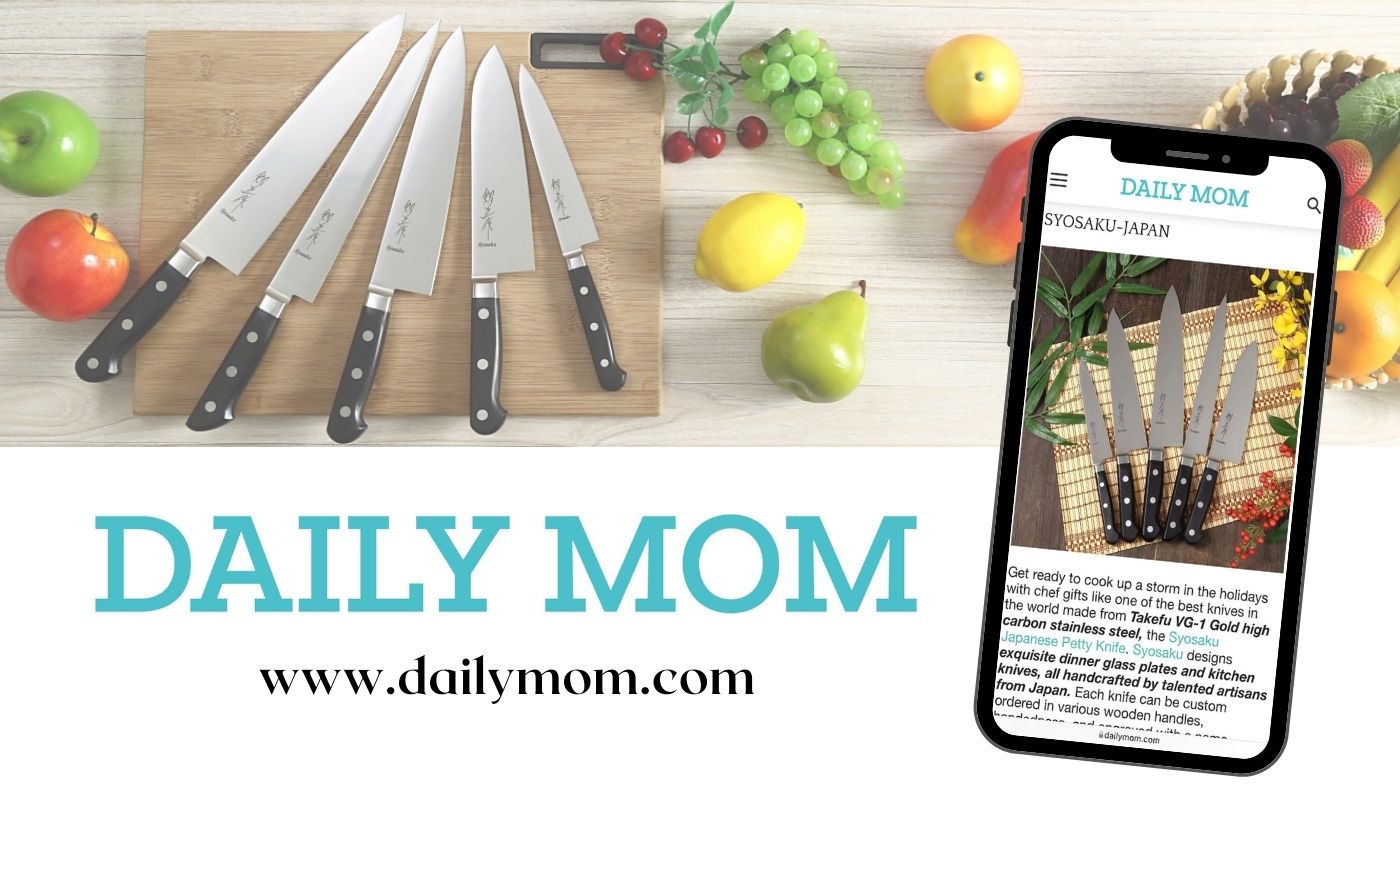 Syosaku-Japan was Featured in Daily Mom